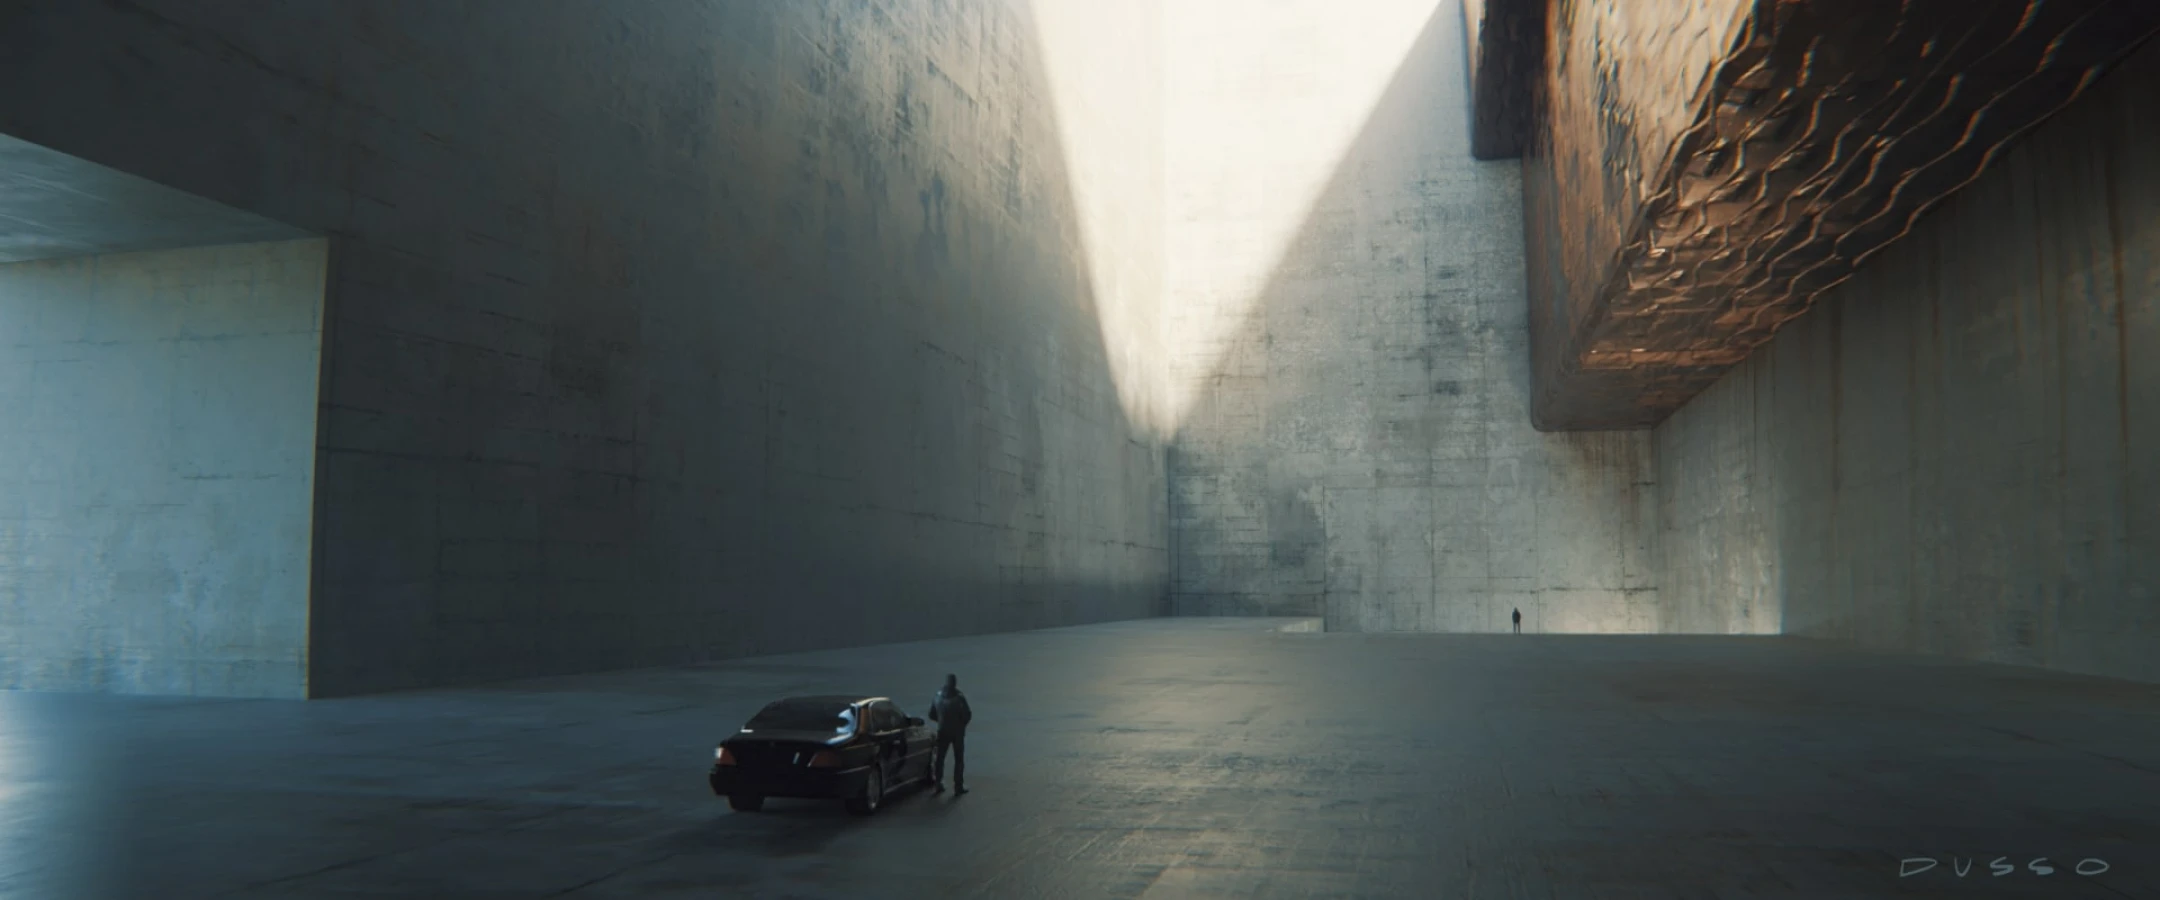  Car in a cubist architectural setting concept art from Raynault vfx 